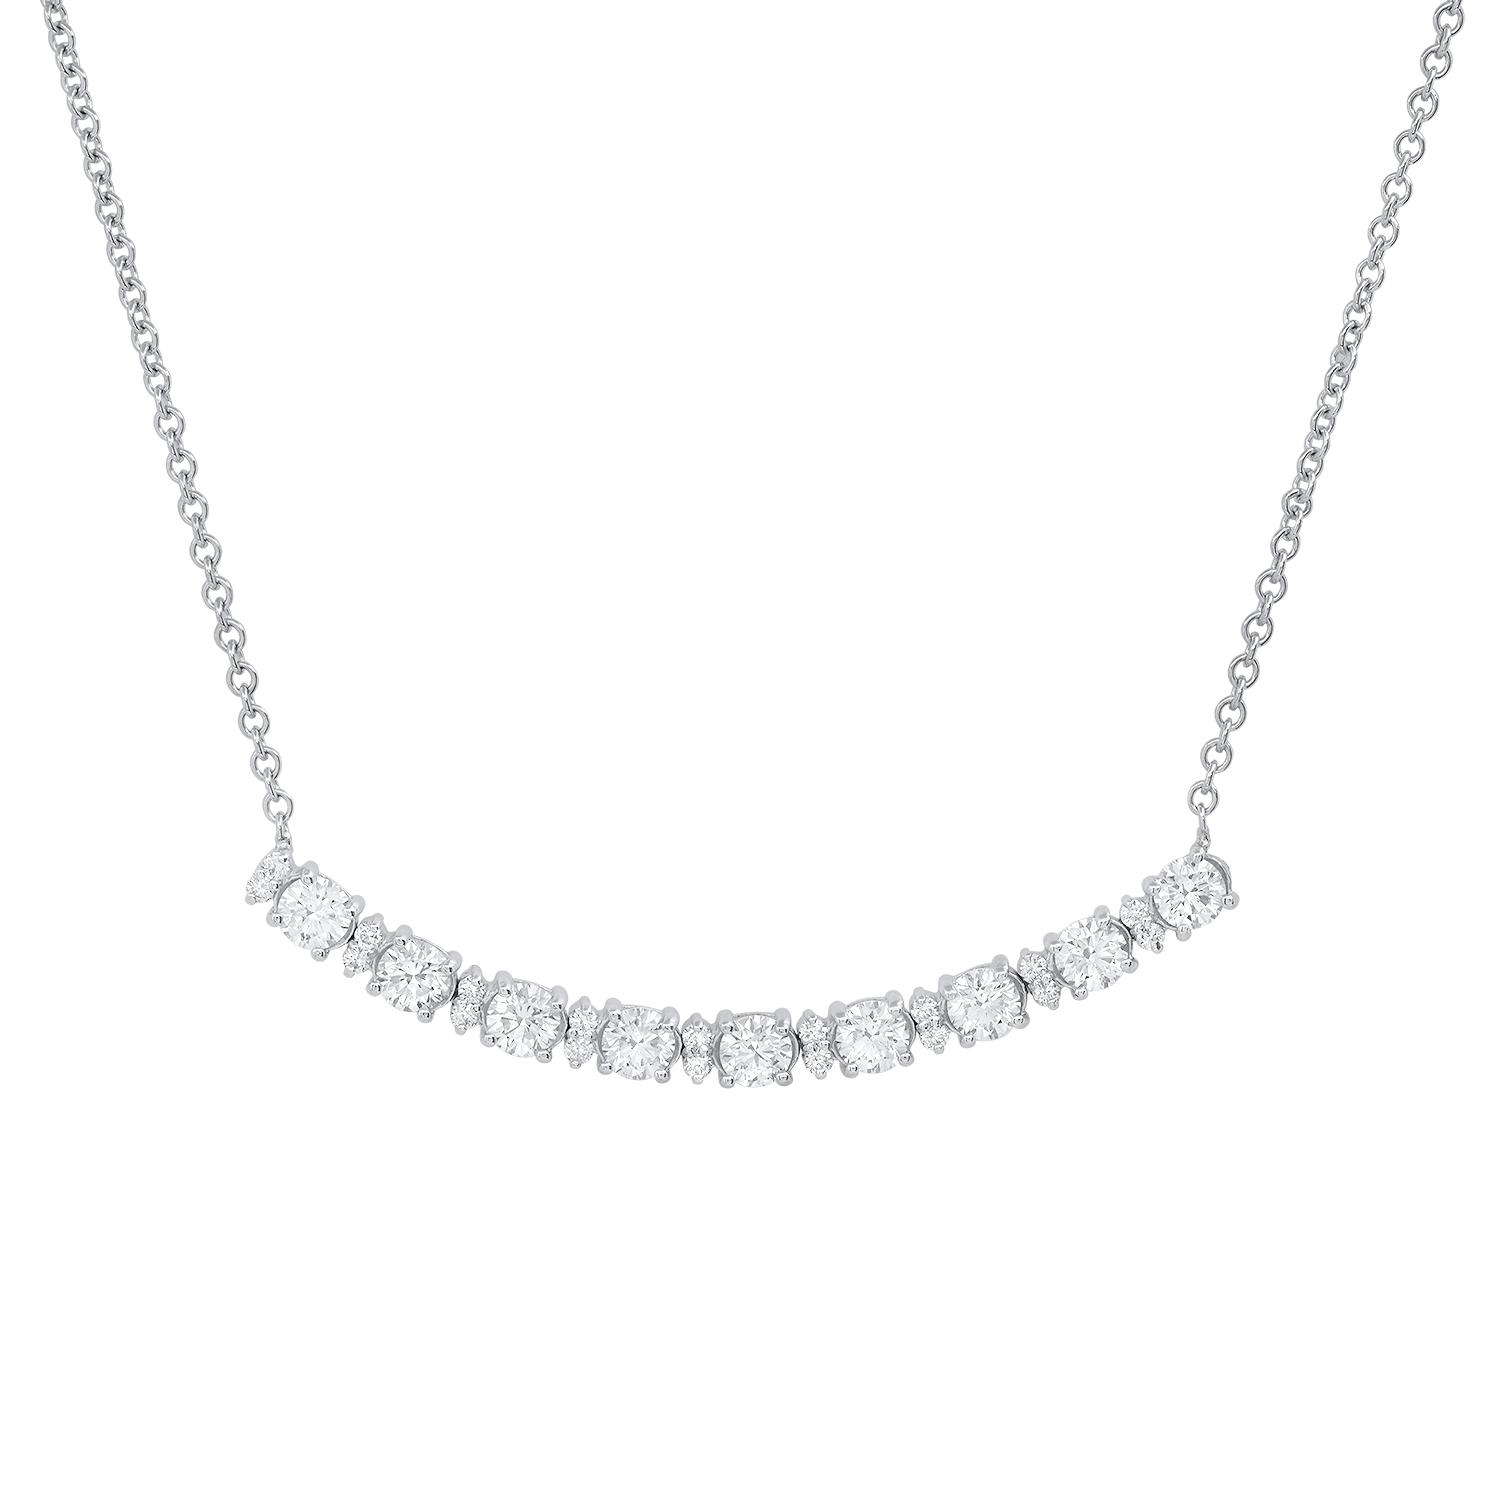 14K White Gold Earring and Necklace Set with 4.58ct Diamonds